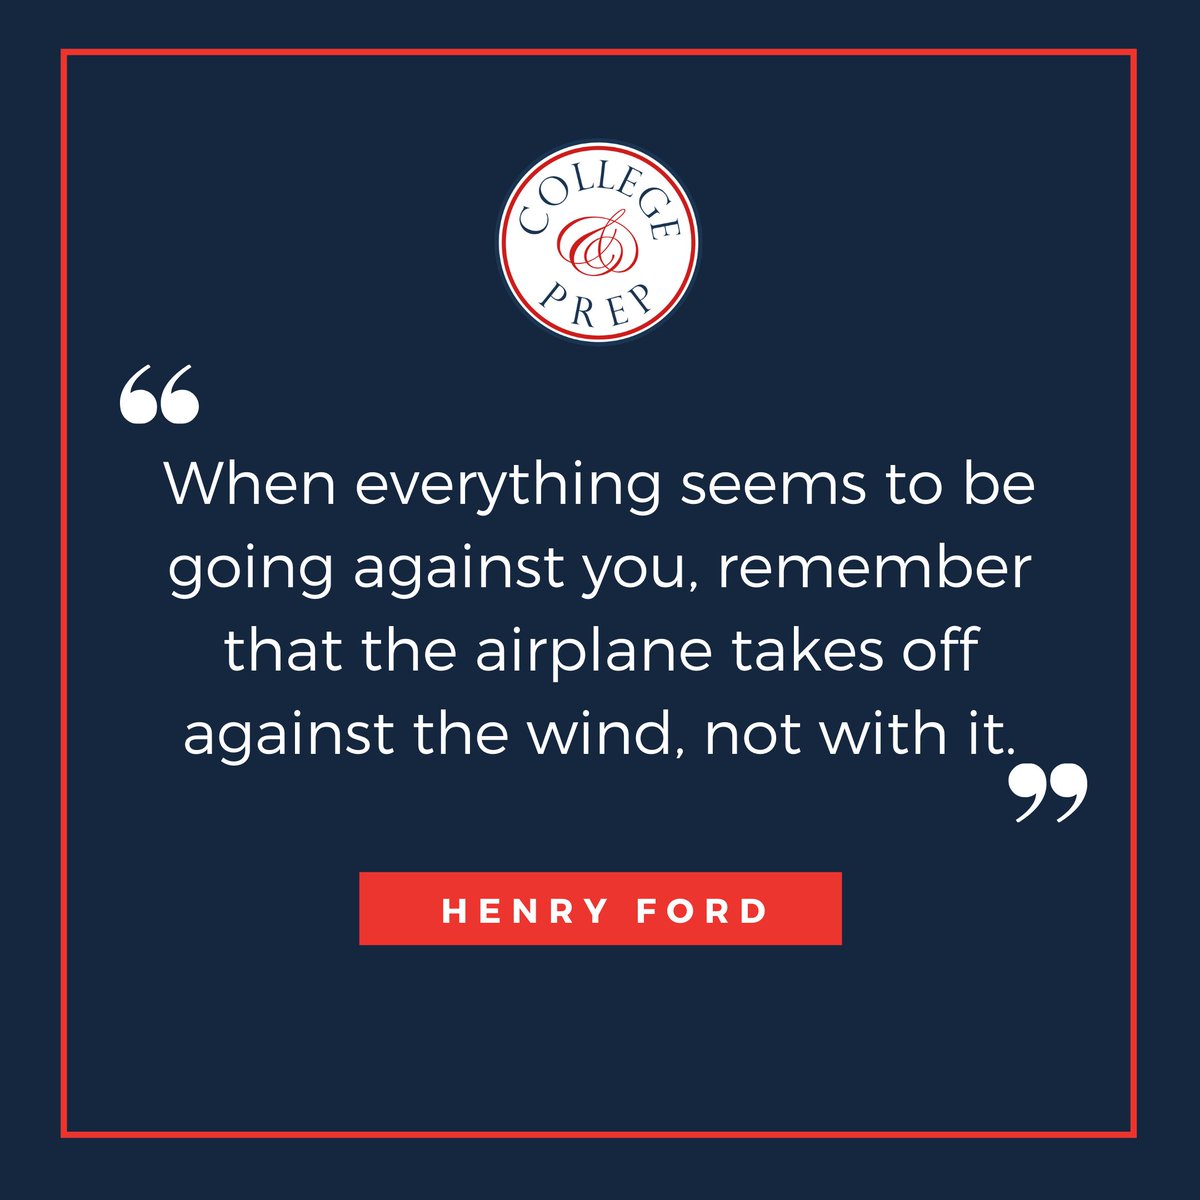 When everything seems to be going against you, remember that the airplane takes off against the wind, not with it. ~Henry Ford
#CollegeAdmissions#IvyEducation#CollegeConsulting #CollegeConsultants #AdmissionsConsulting #BoardingSchools #Boardingschooladmissions#CollegeAdmissions